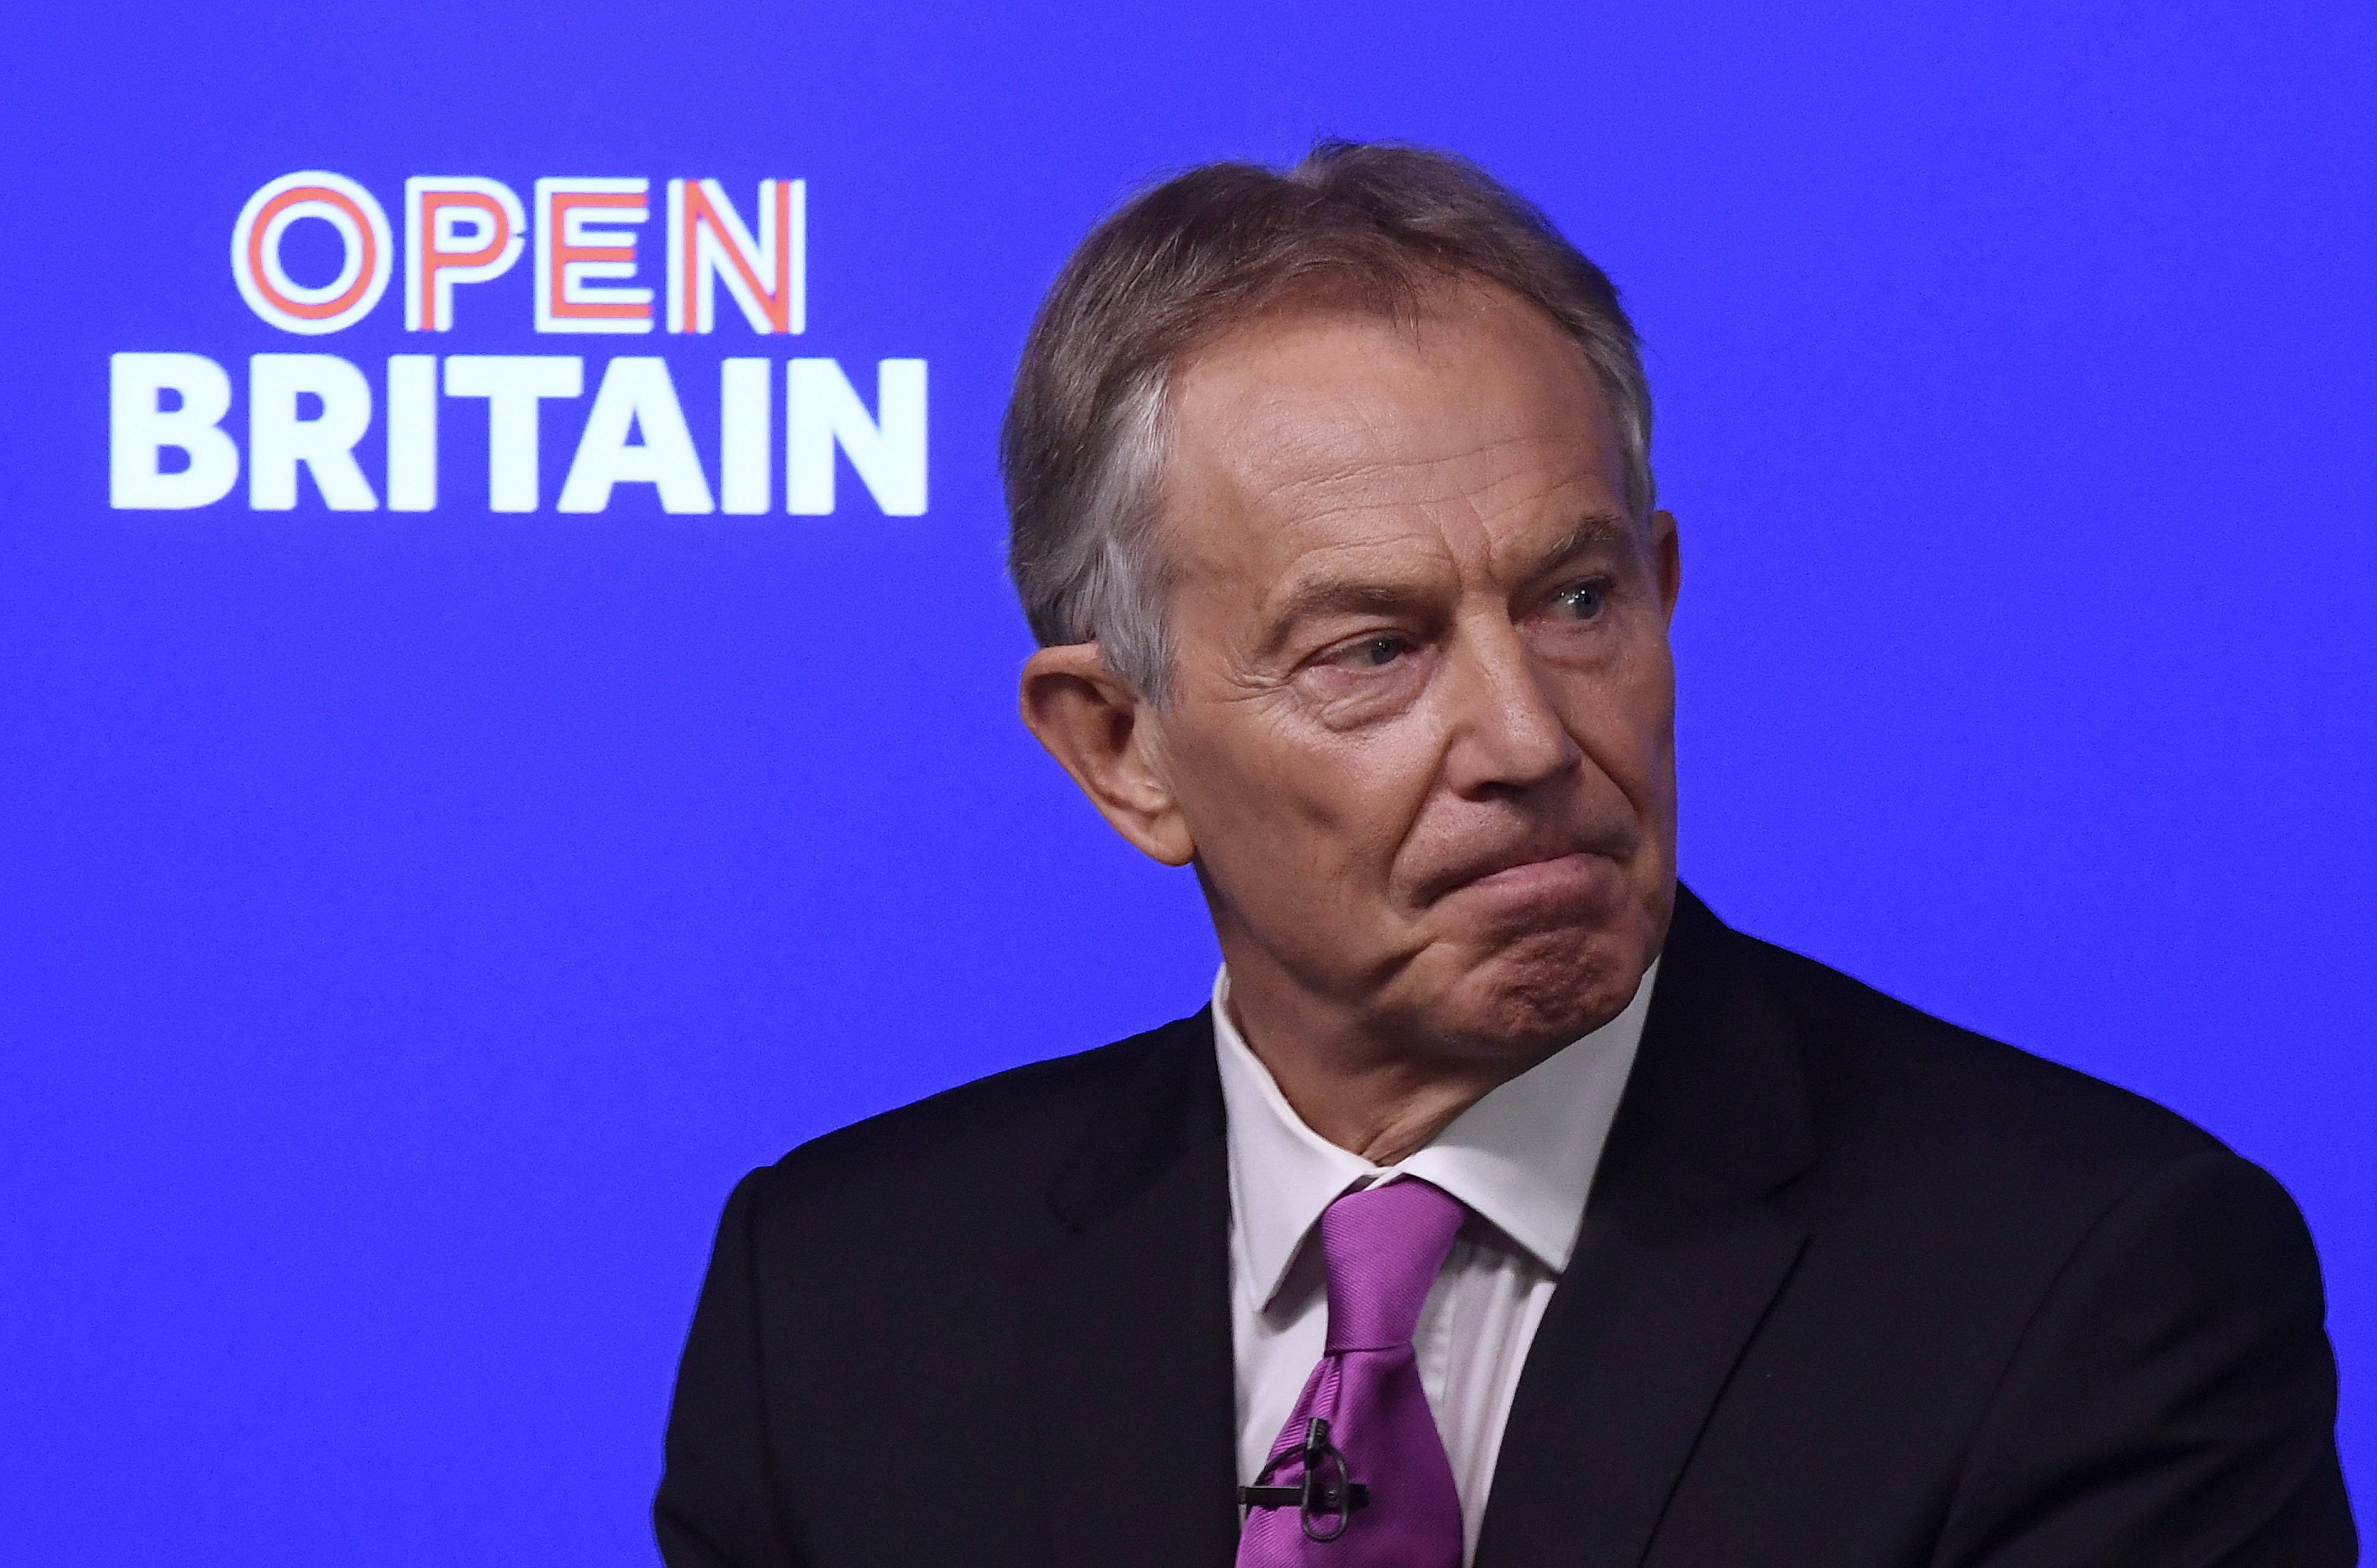 Former British Prime Minister Tony Blair speaks at a pro-Europe event in London on Feb. 17, 2017. (Toby Melville—Reuters)